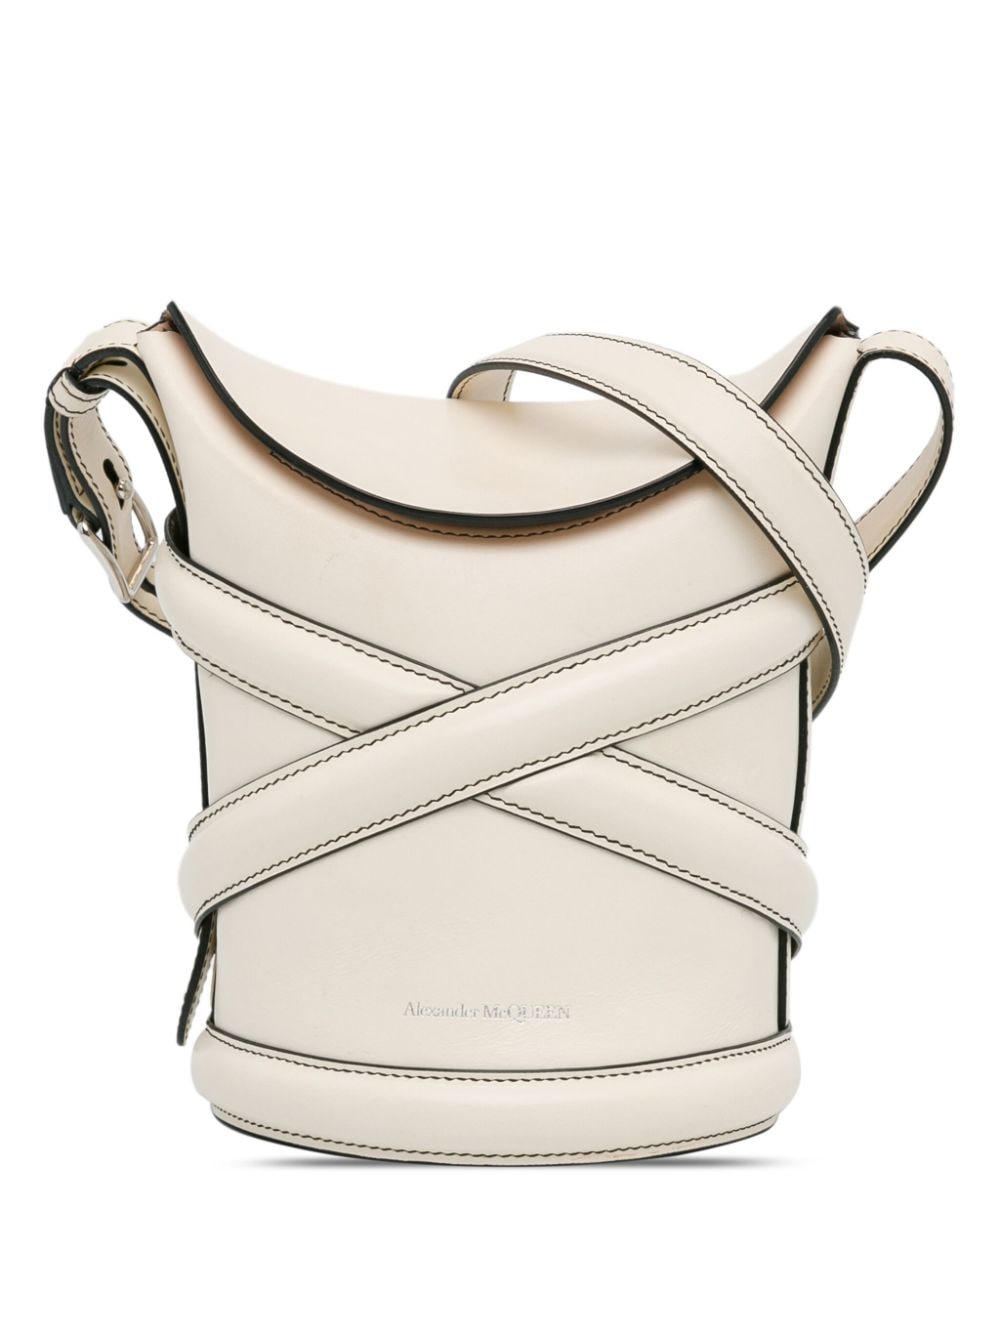 Alexander McQueen Pre-Owned 2021-2023 The Curve bucket bag - White von Alexander McQueen Pre-Owned